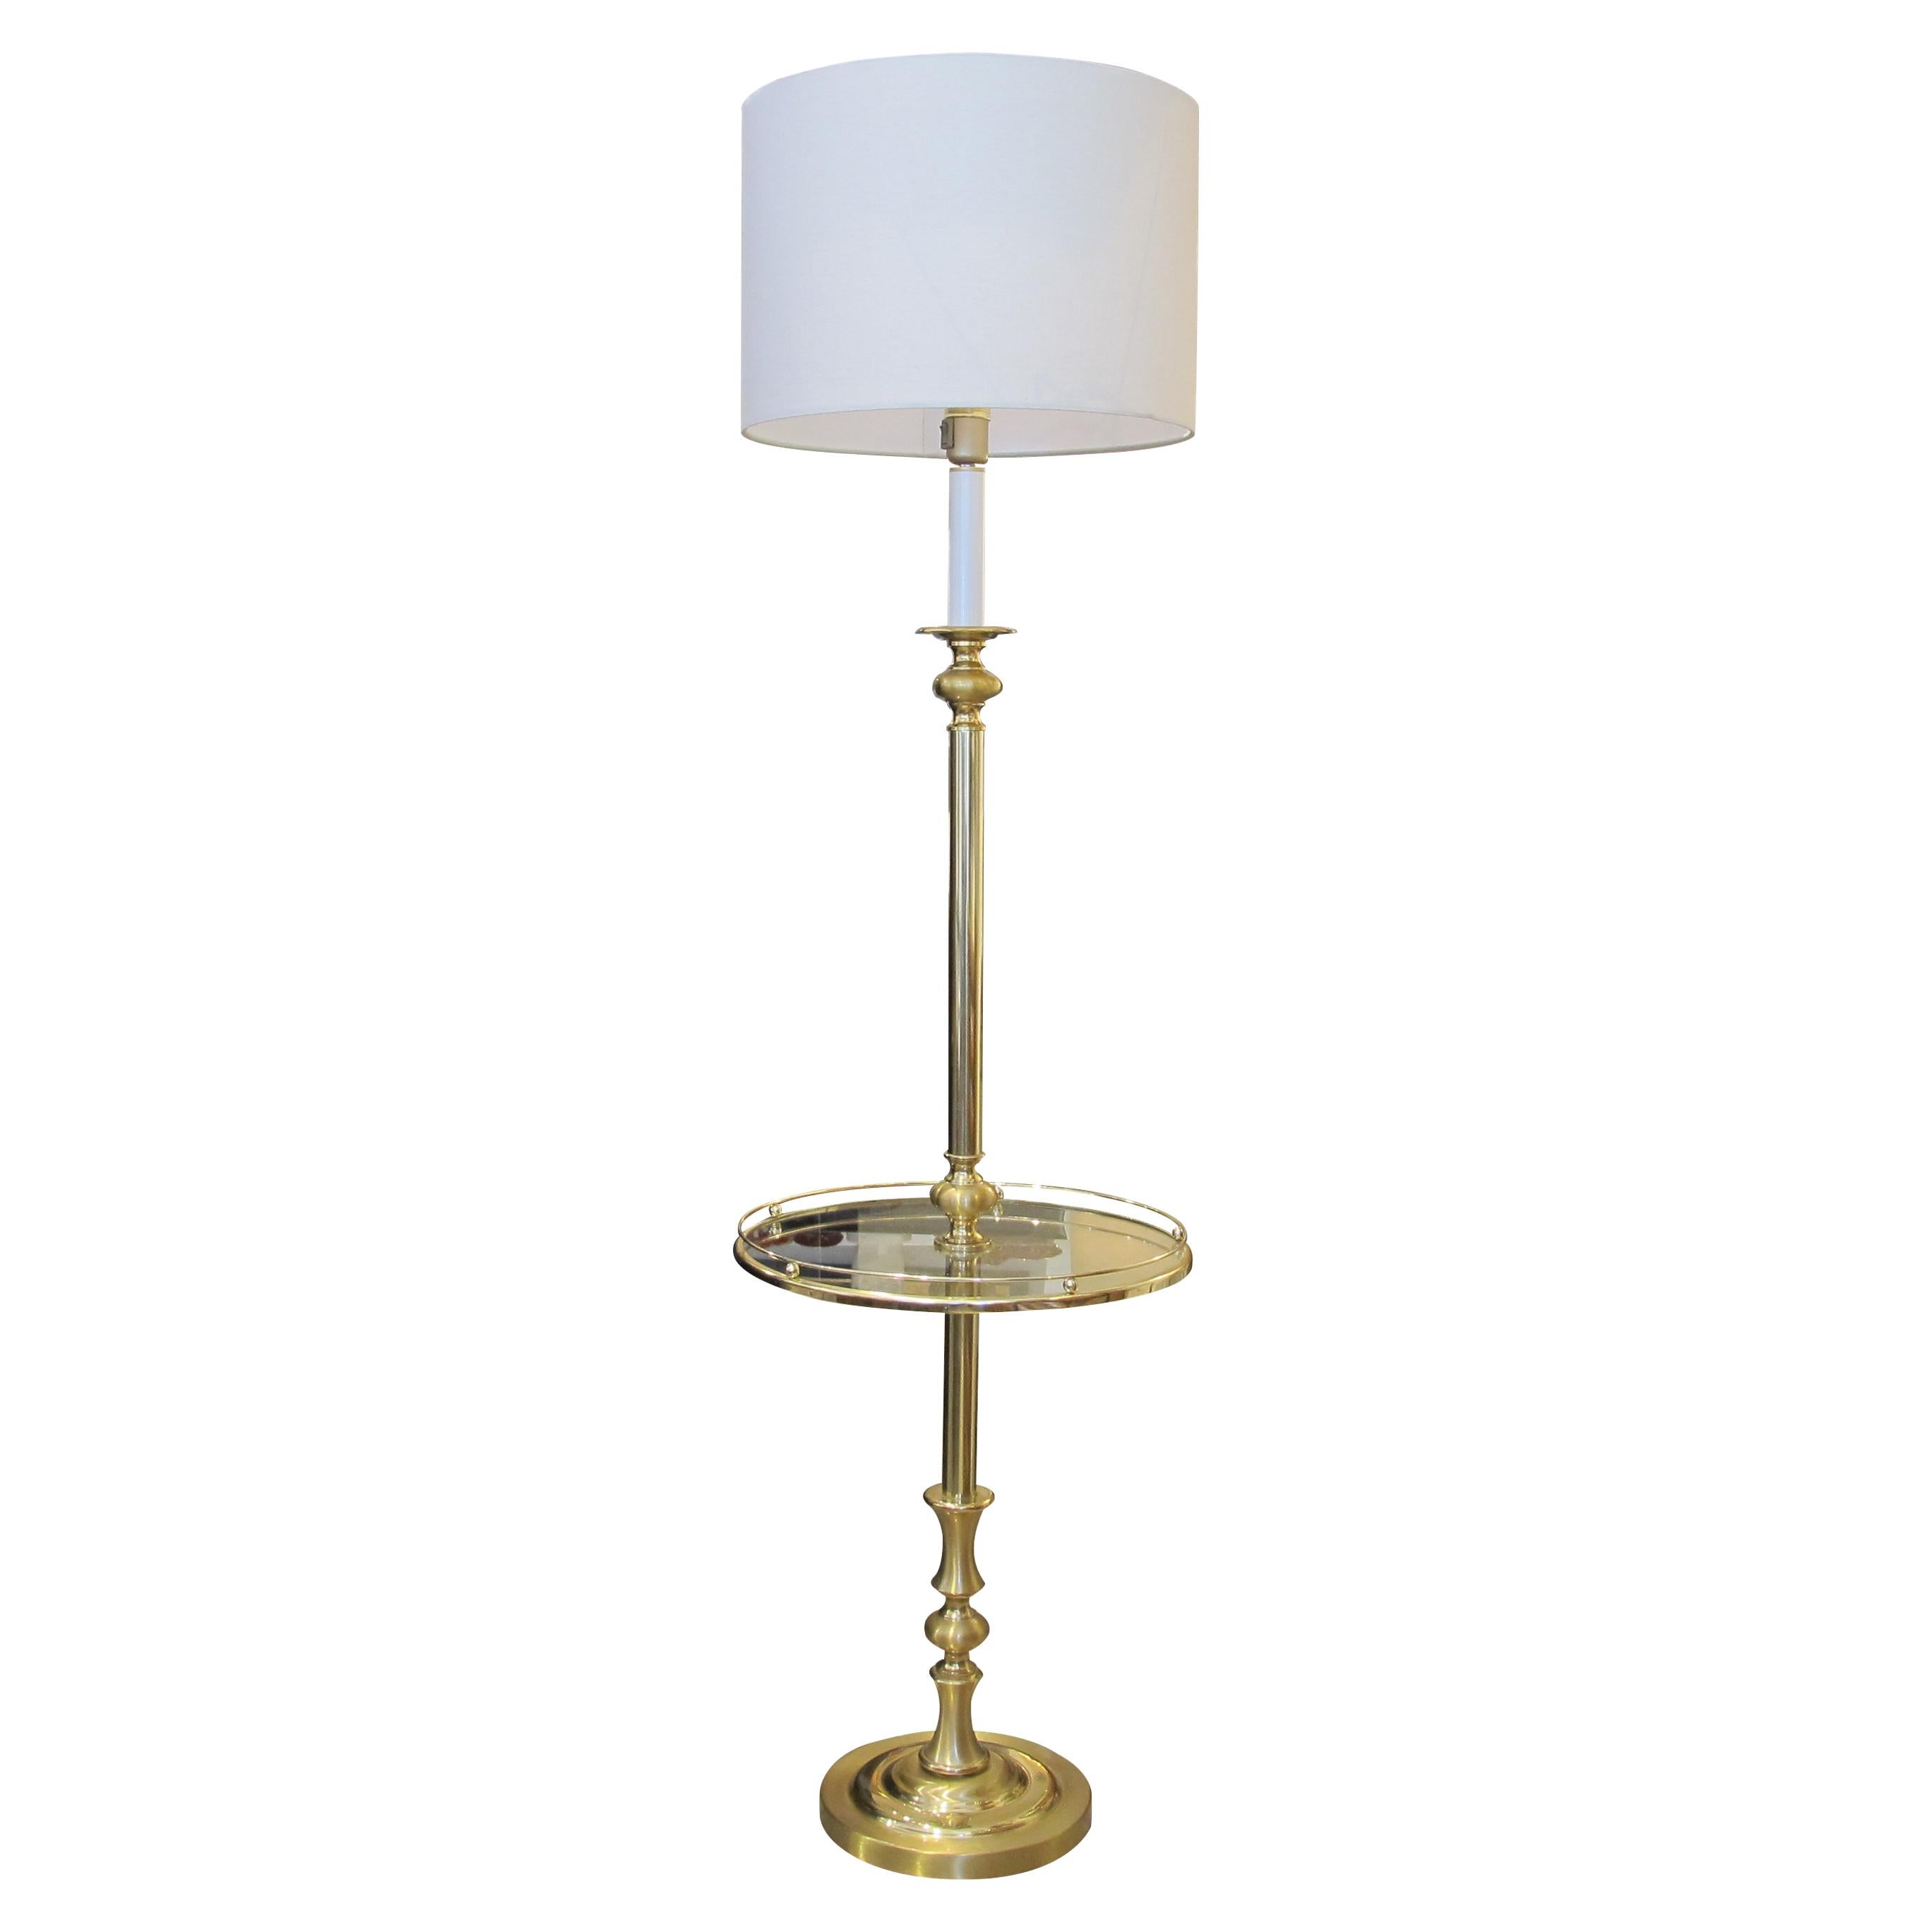 Mid-Century Modern 1970s Pair of Brass Floor Lamps with Integrated Side Tables, Swedish For Sale